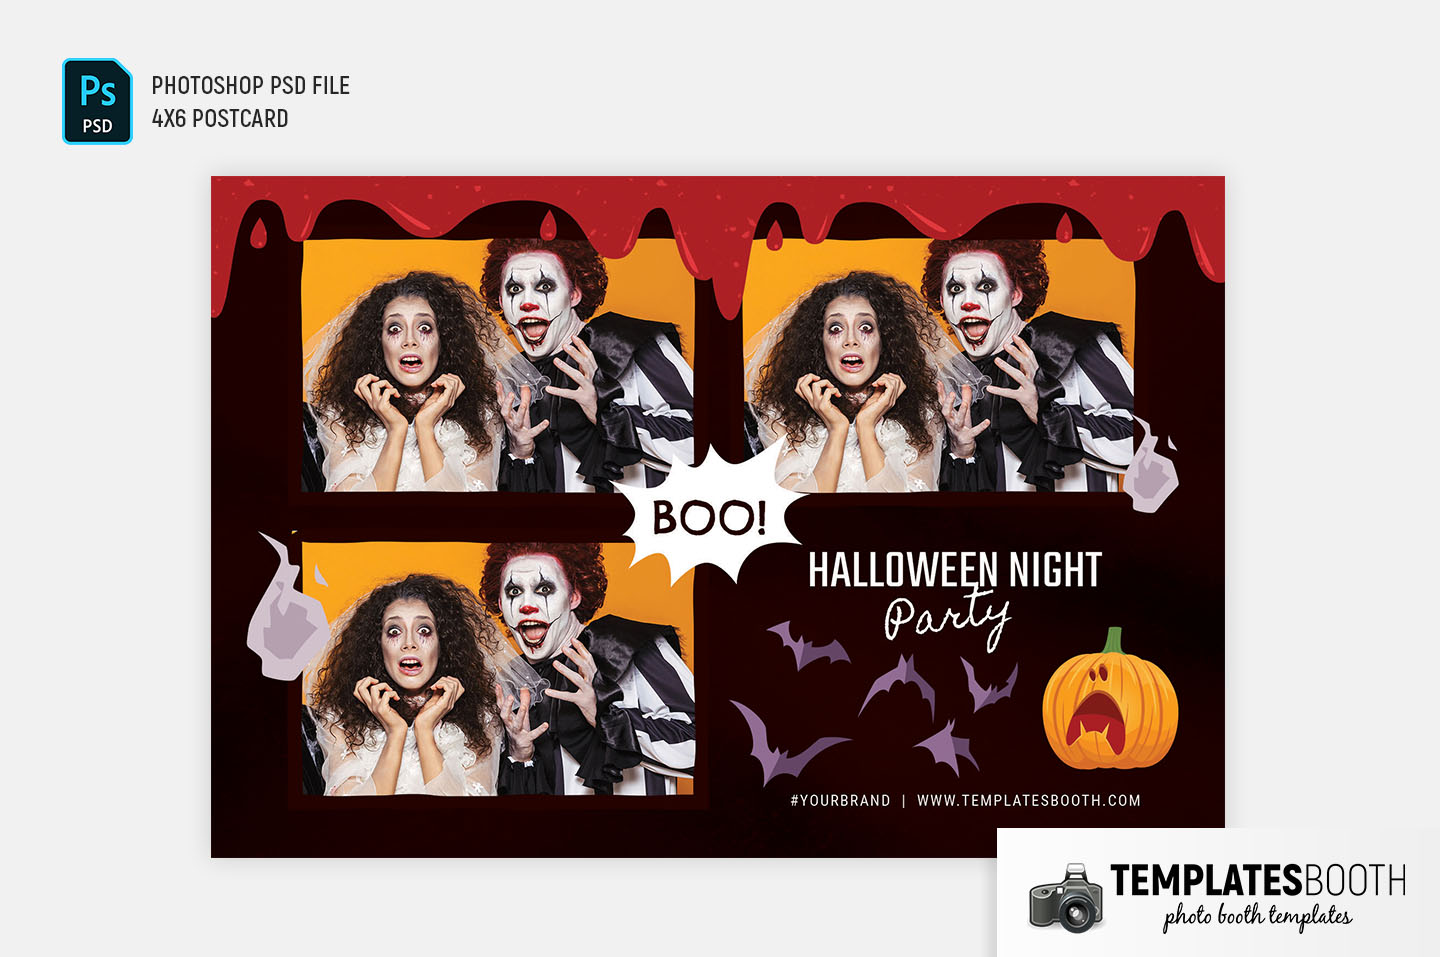 Bloody Halloween Photo Booth Template